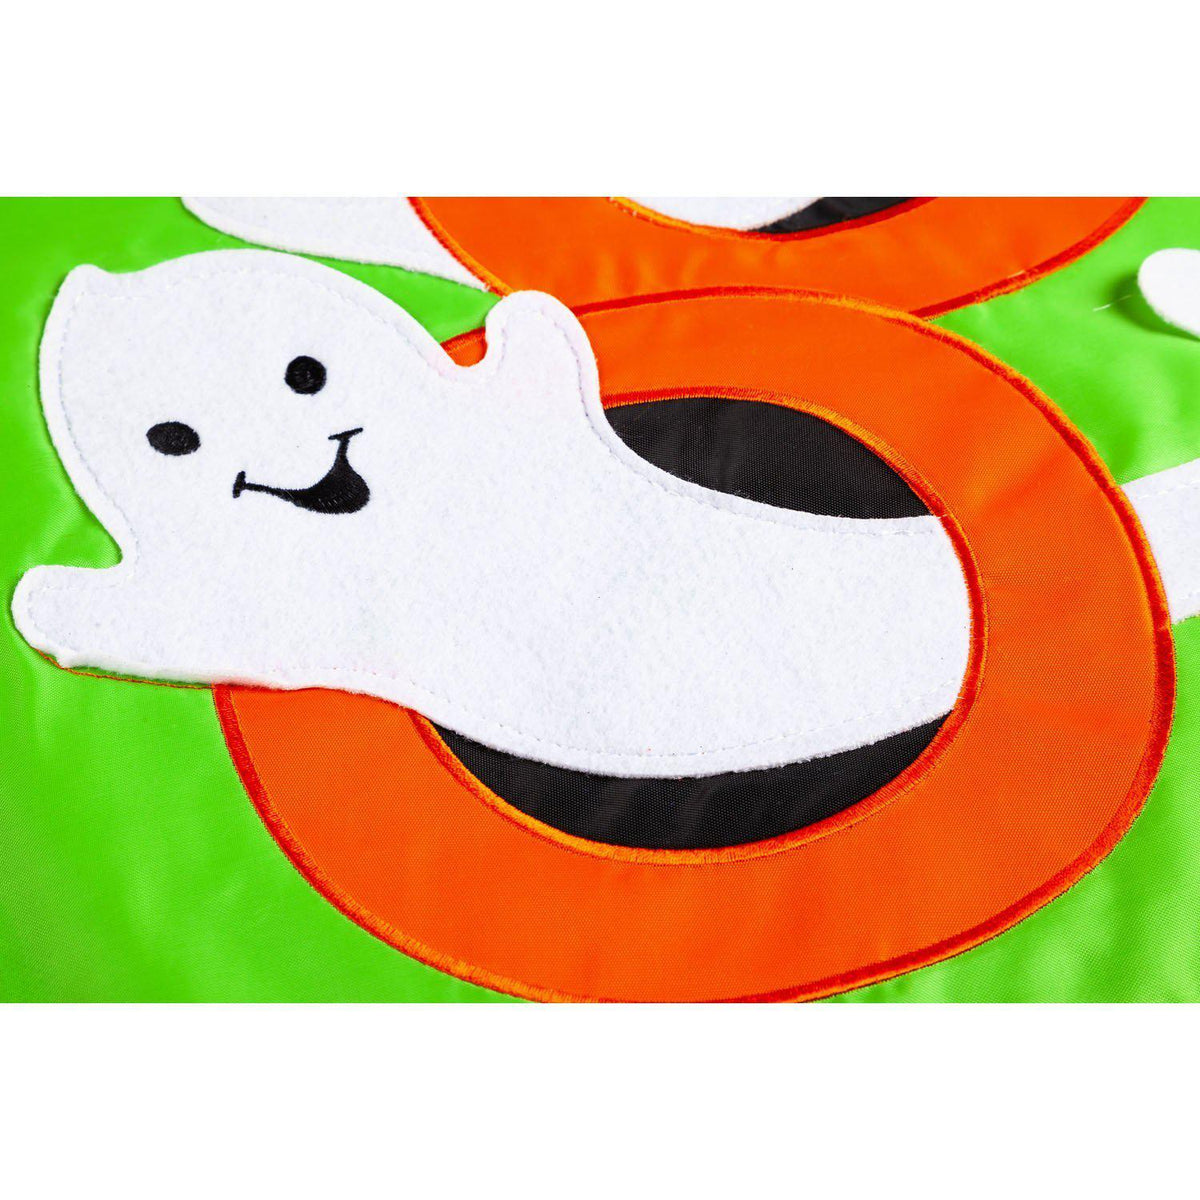 The BOO Ghosts garden flag features two cute ghosts popping through the O's of the word "BOO". 